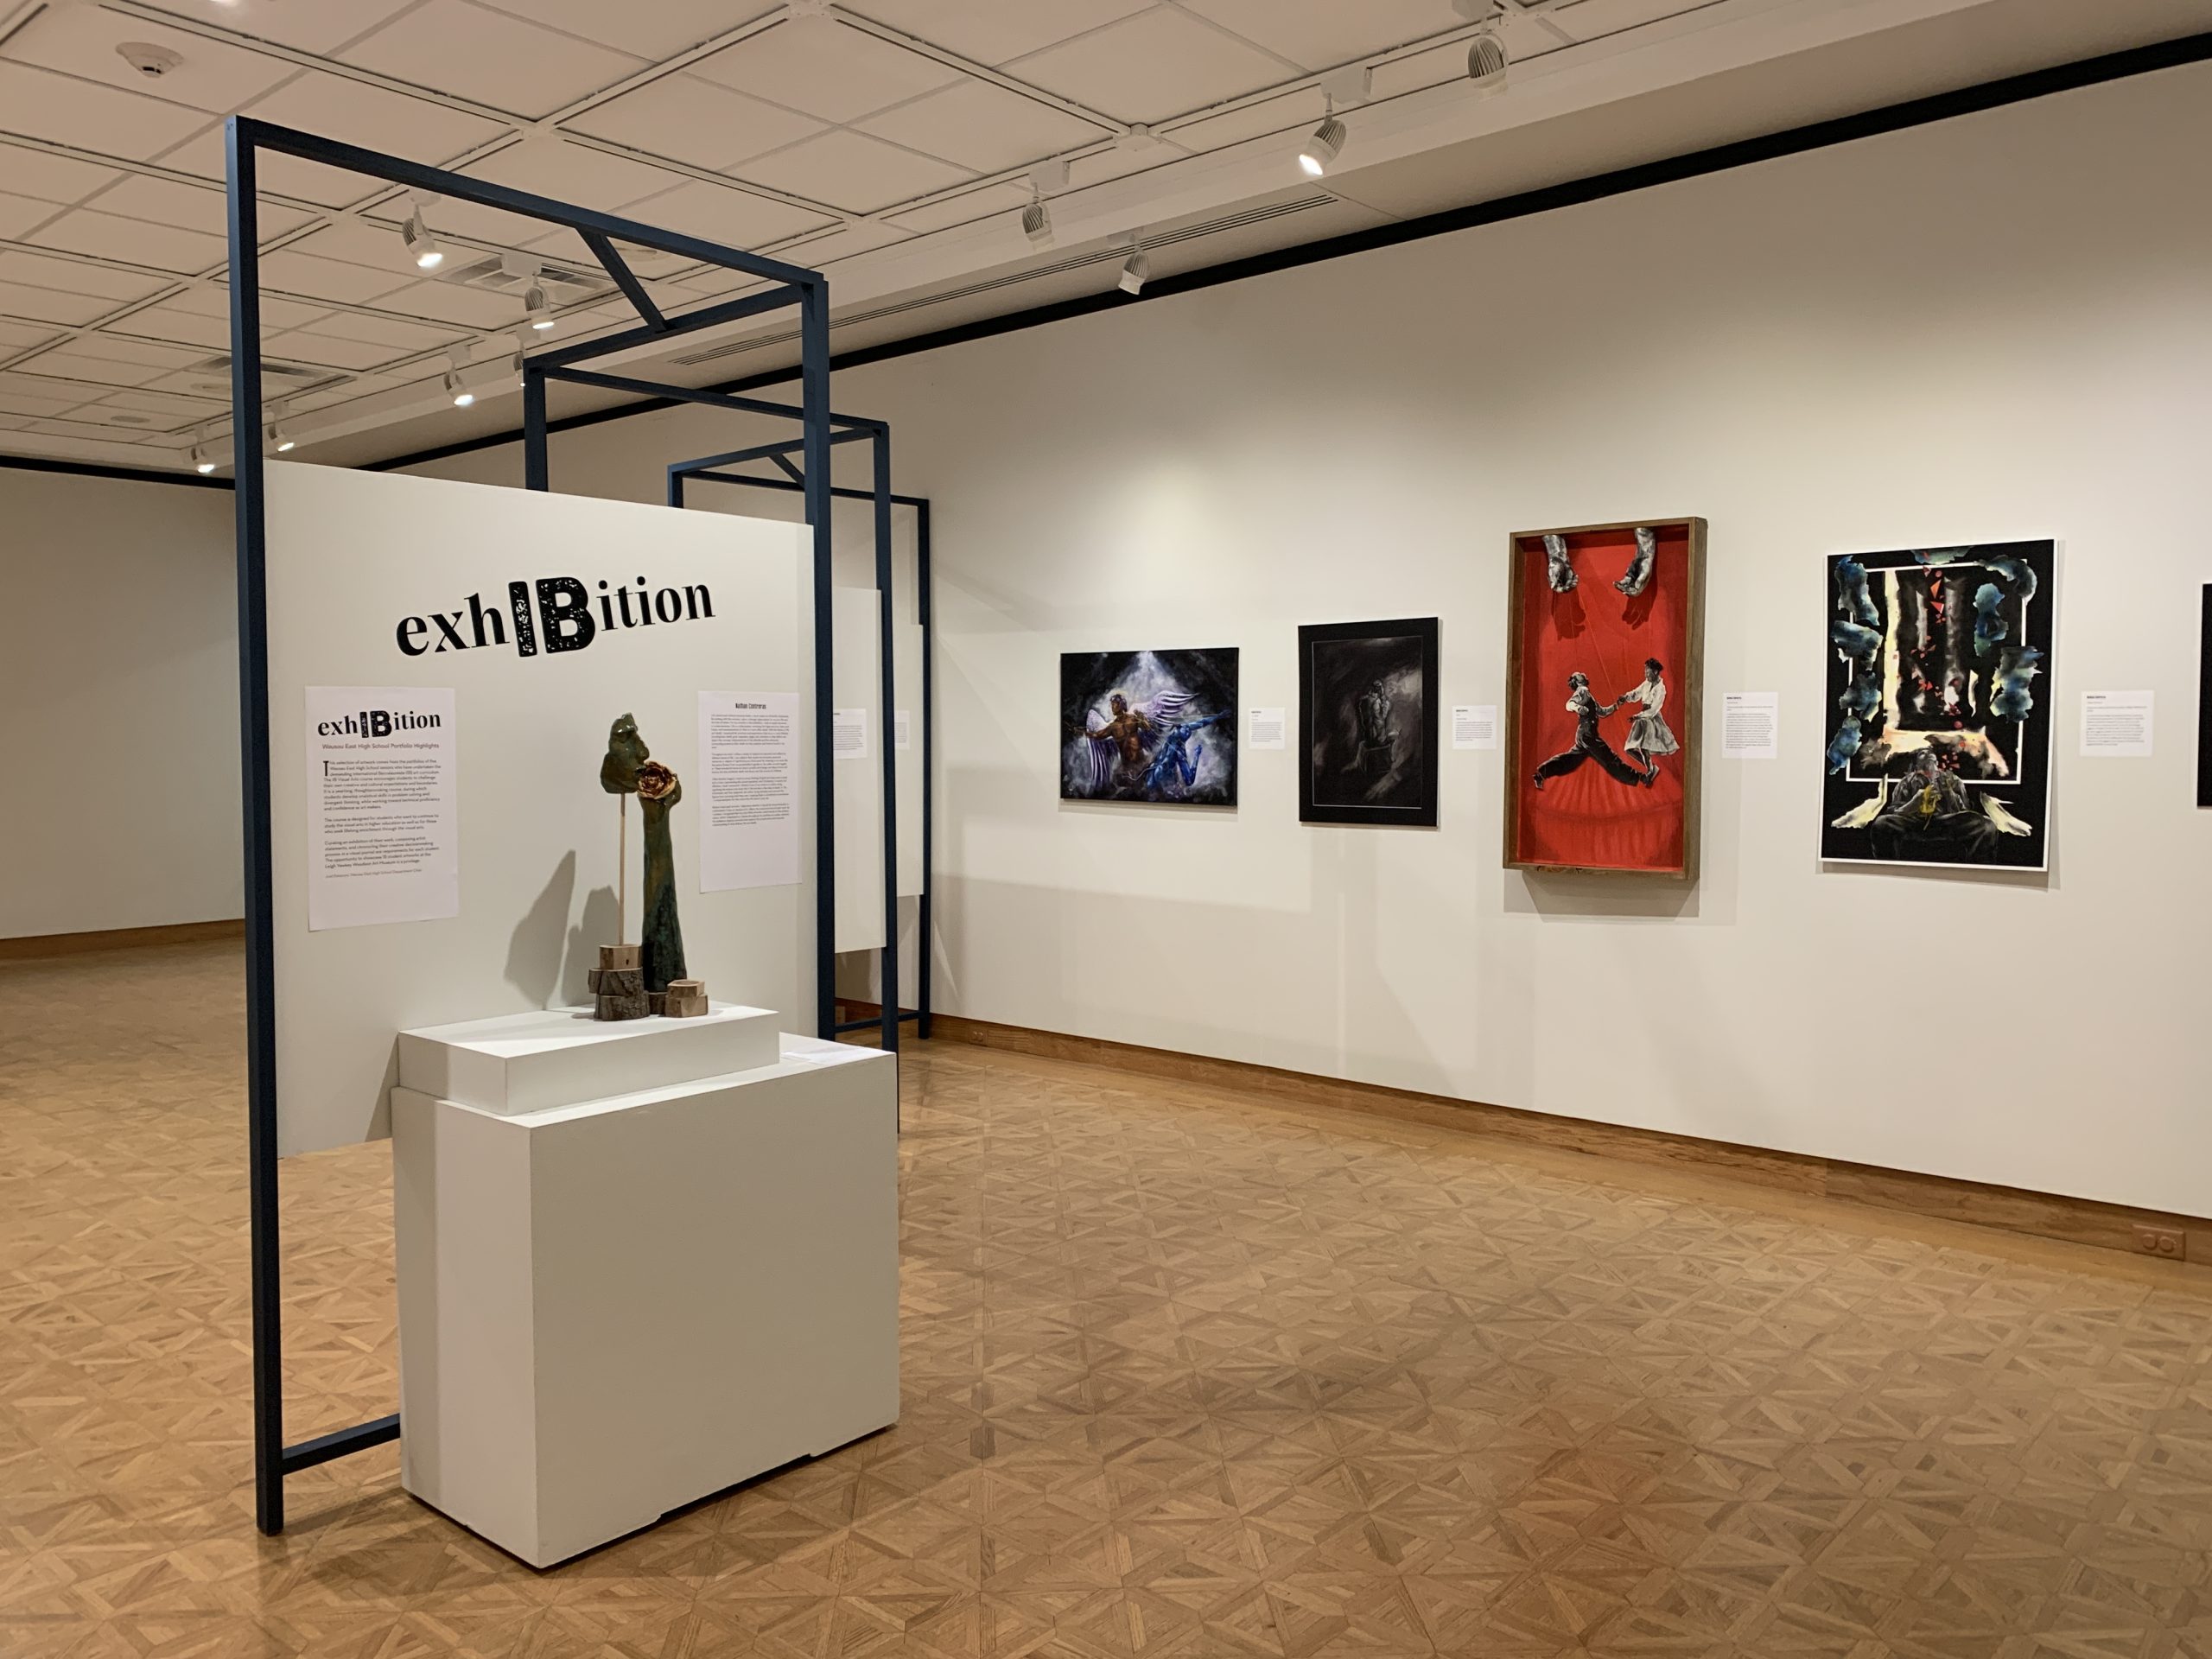 This image shows artworks from the Wausau East High School exhibition